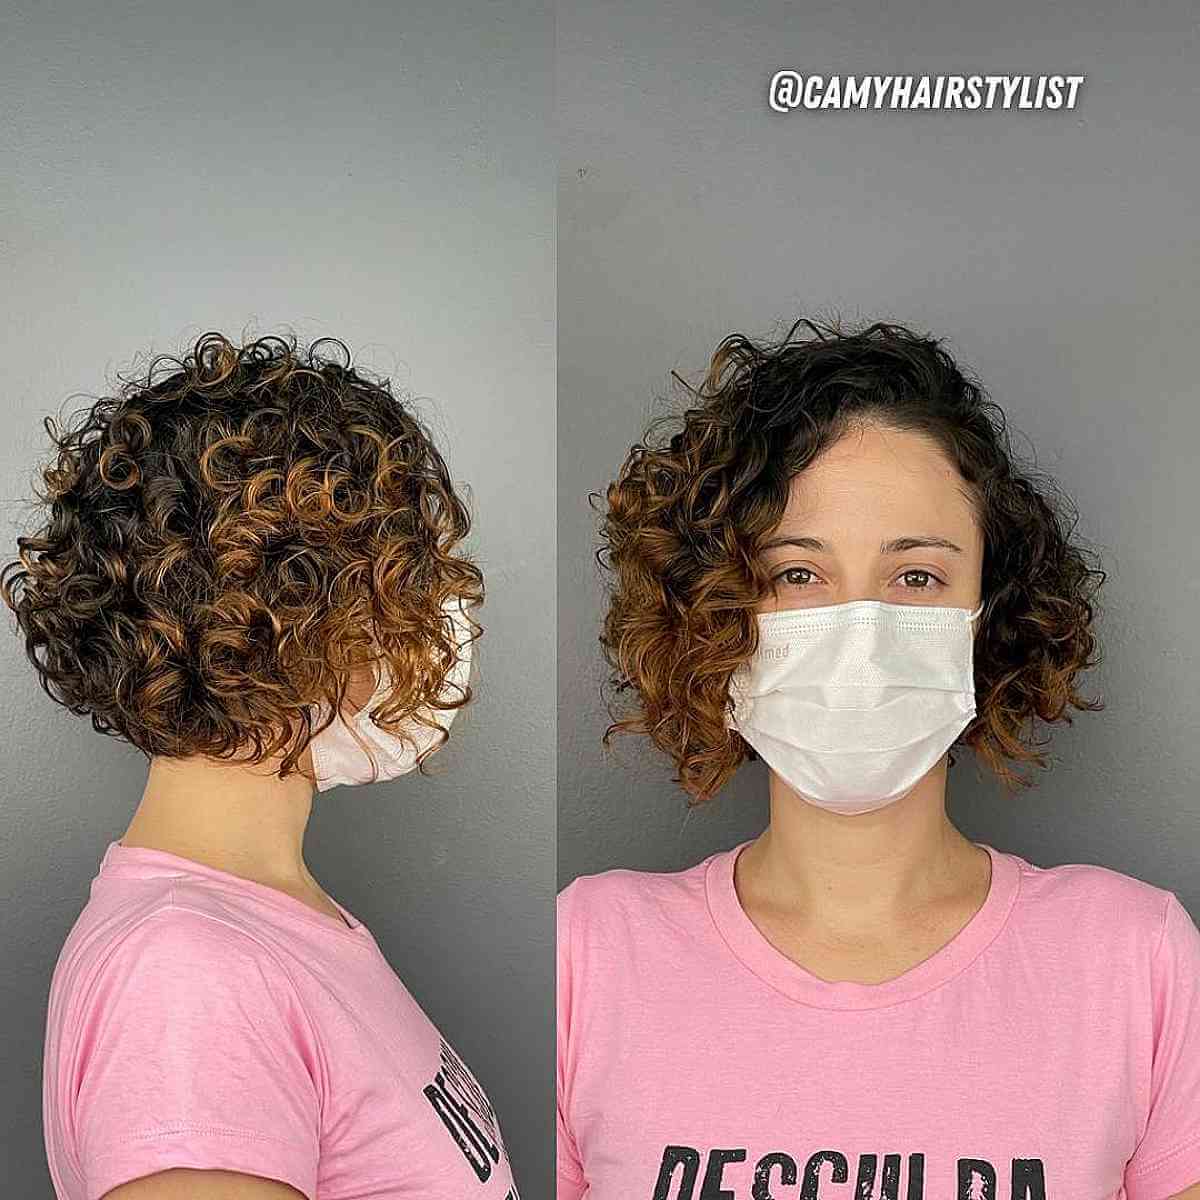 Chin-Length Curly Hair with a Side Part and Layers